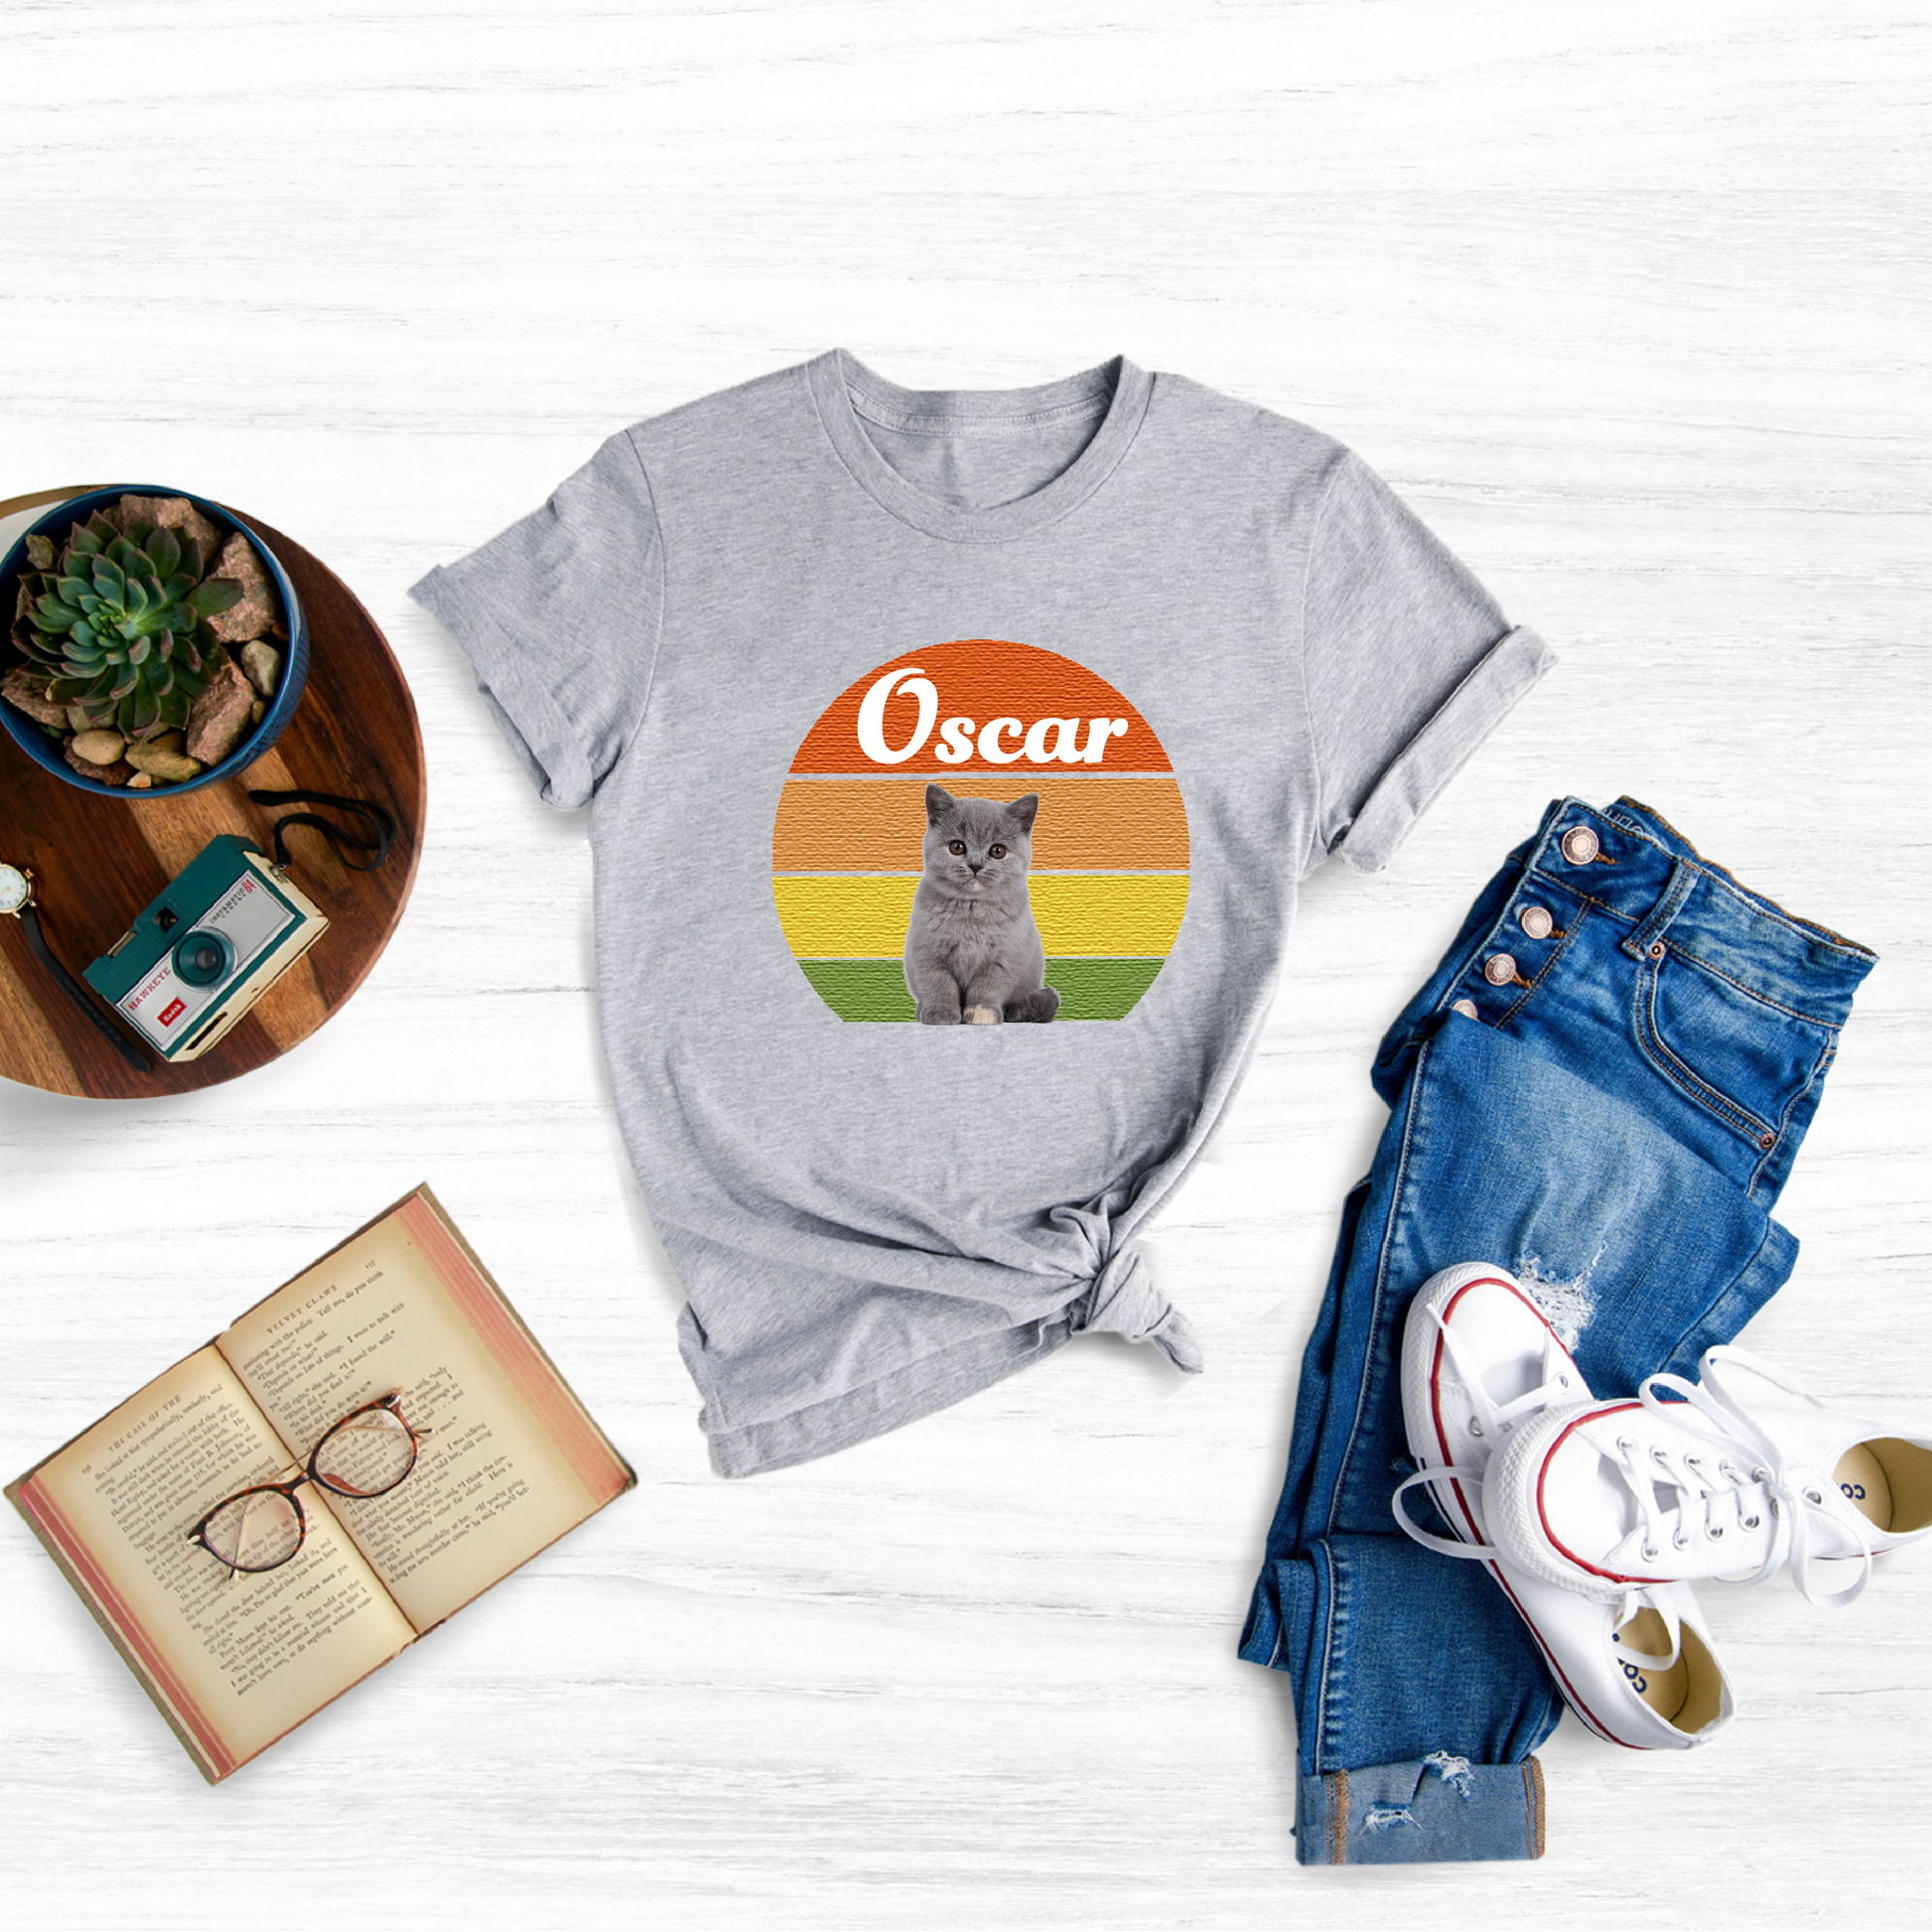 Create a one-of-a-kind vintage cat shirt featuring your cat's name, photo, or special message.